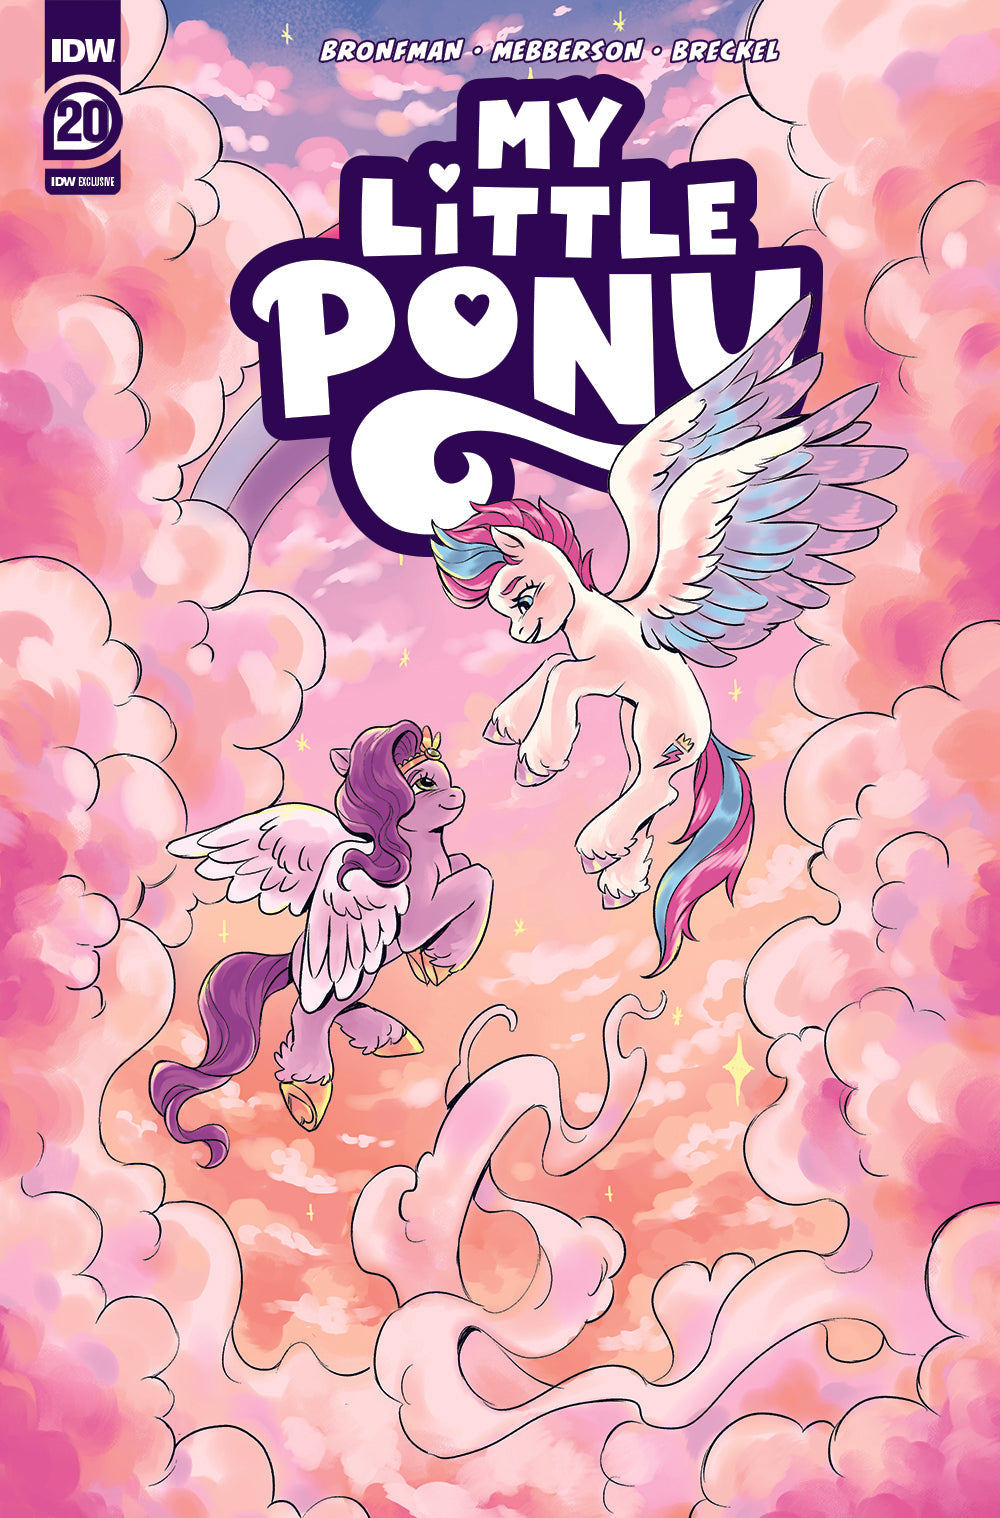 My Little Pony #20 - 2023 IDW Exclusive